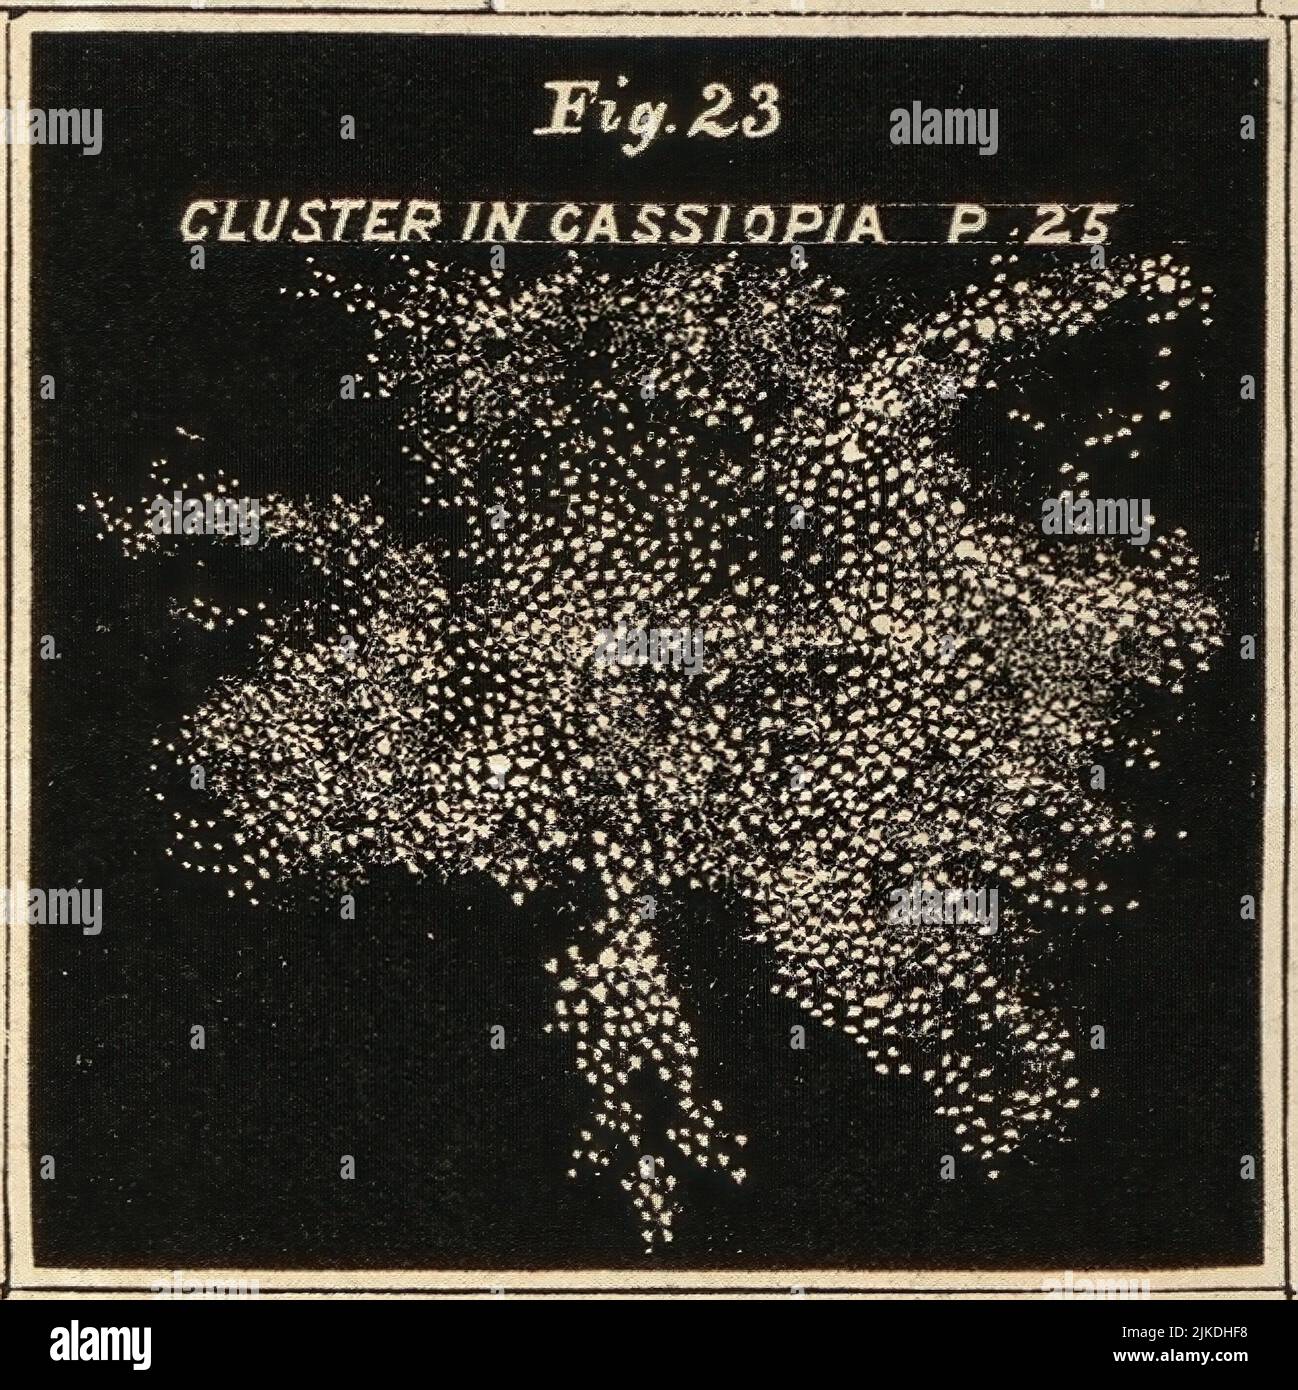 Cluster in Cassiopia - Atlas designed to illustrate Burritt's Geography of the heavens - Burritt, Elijah H. Double stars and clusters. Clusters, Stock Photo